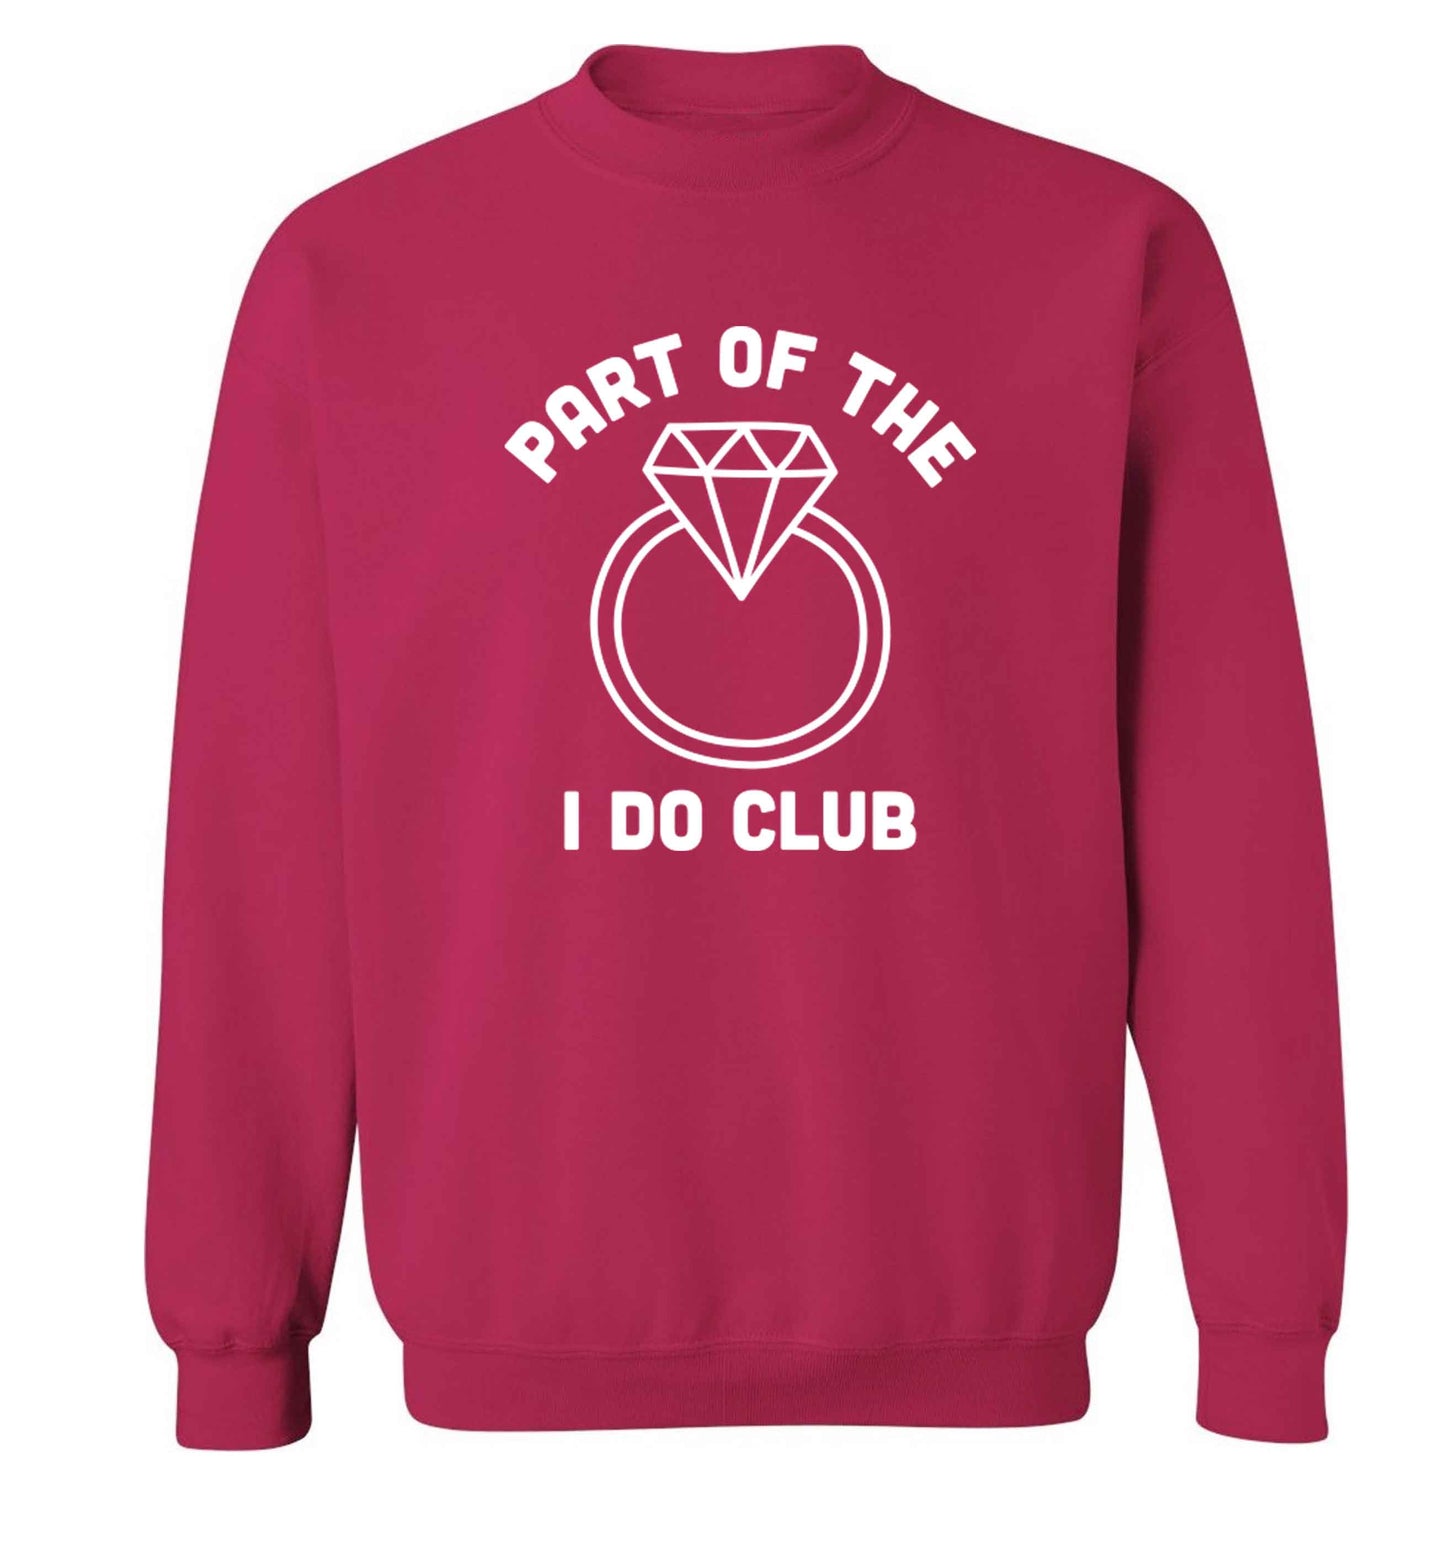 Part of the I do club adult's unisex pink sweater 2XL